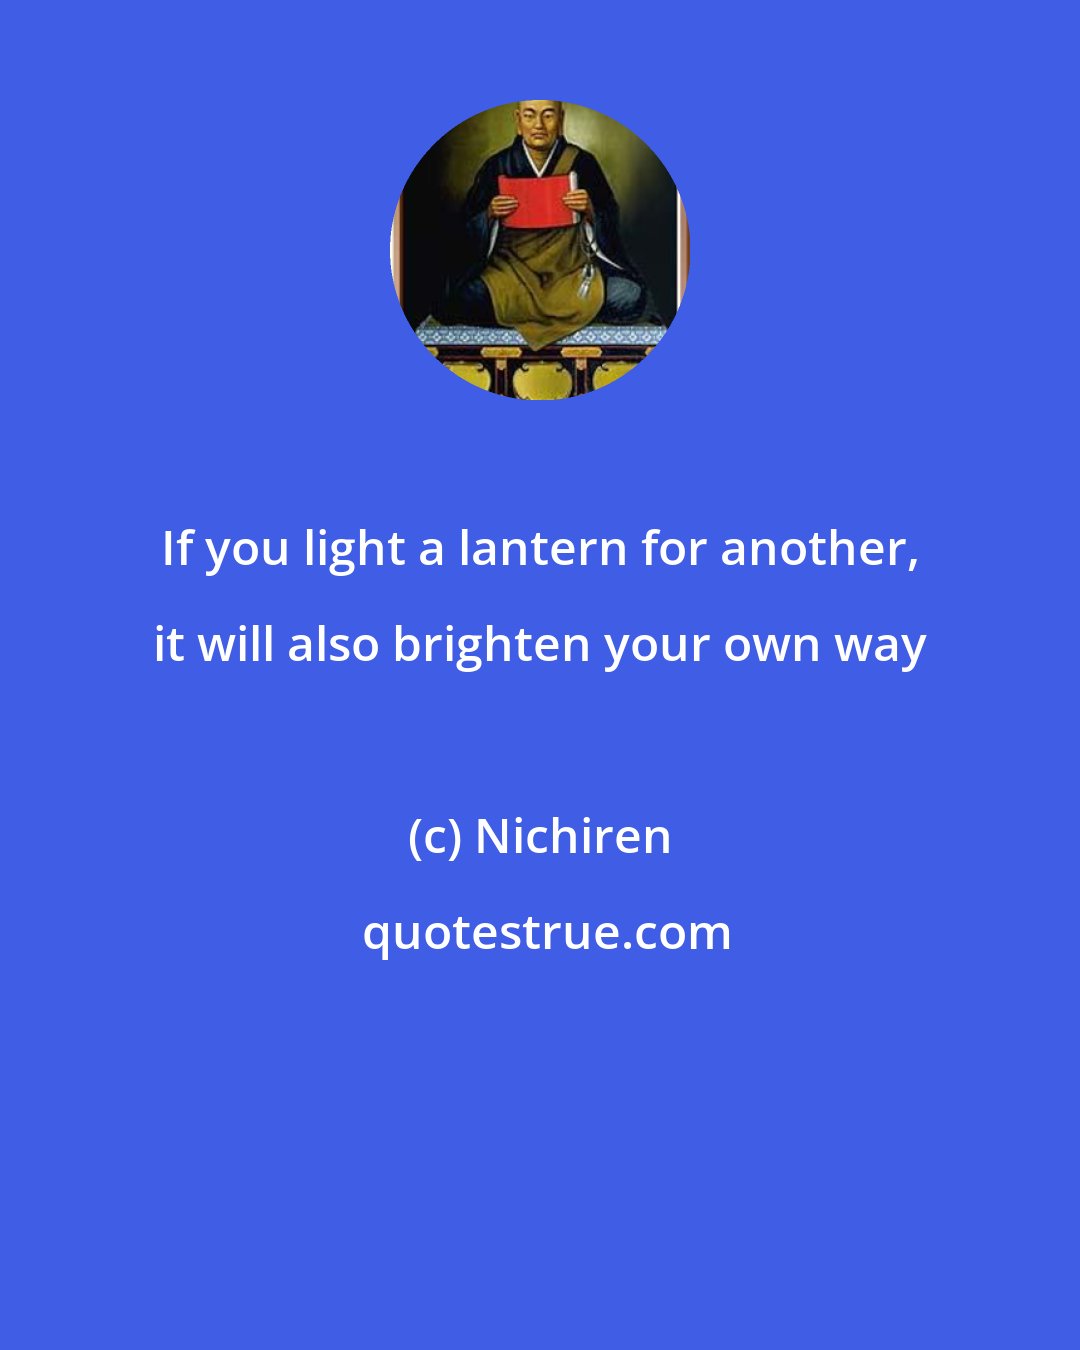 Nichiren: If you light a lantern for another, it will also brighten your own way